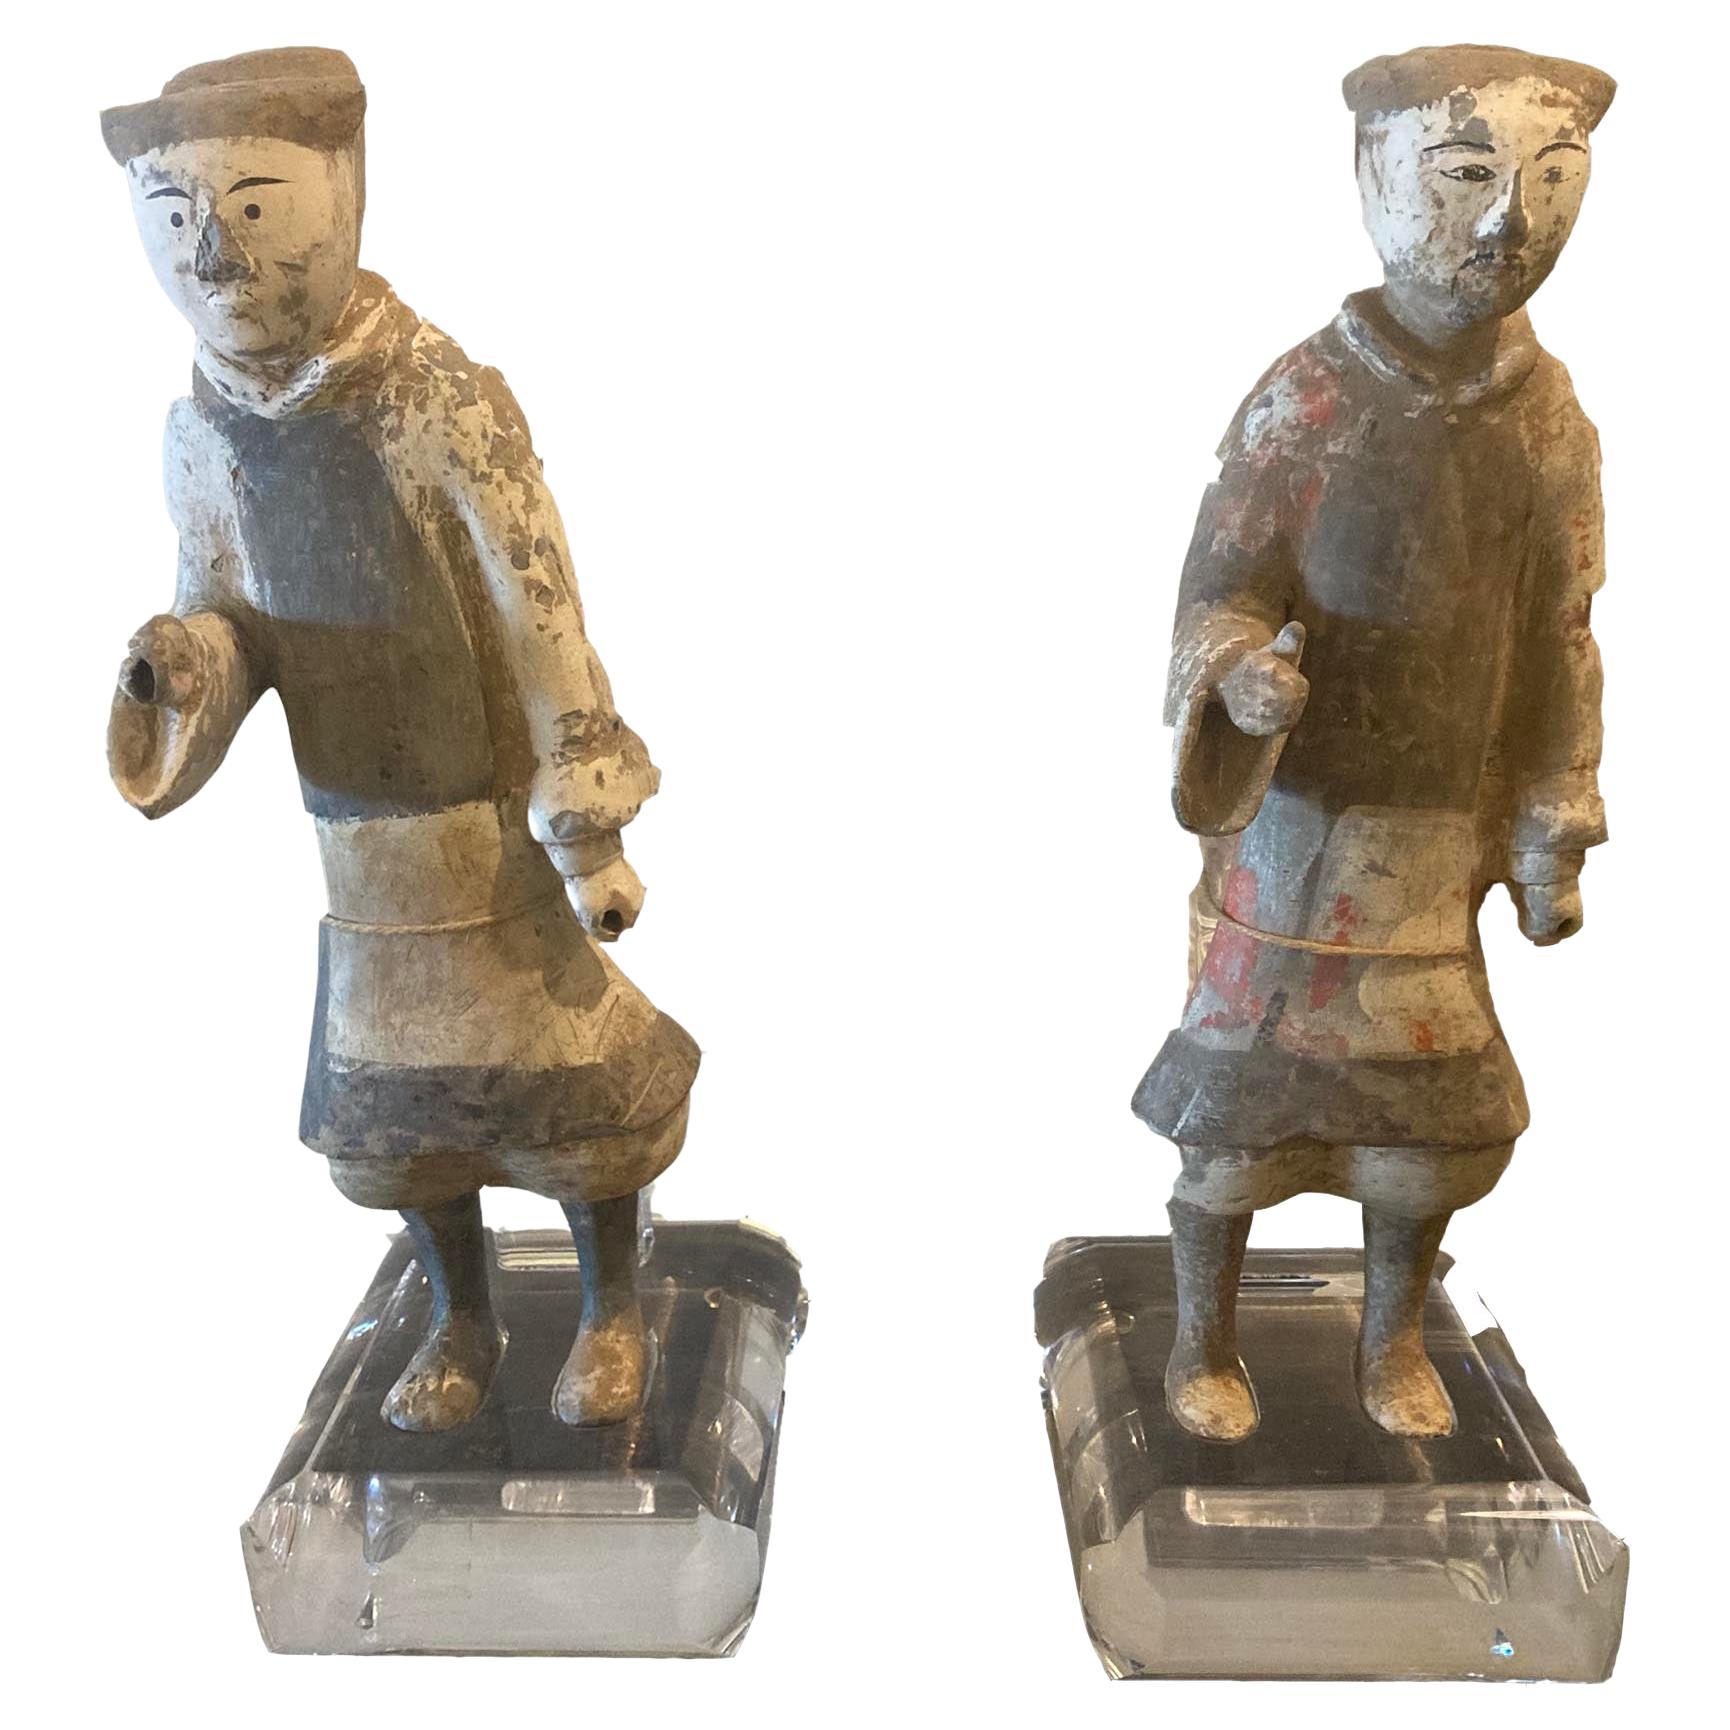 Pair of Antique Chinese Terra Cotta Figures on Lucite Bases